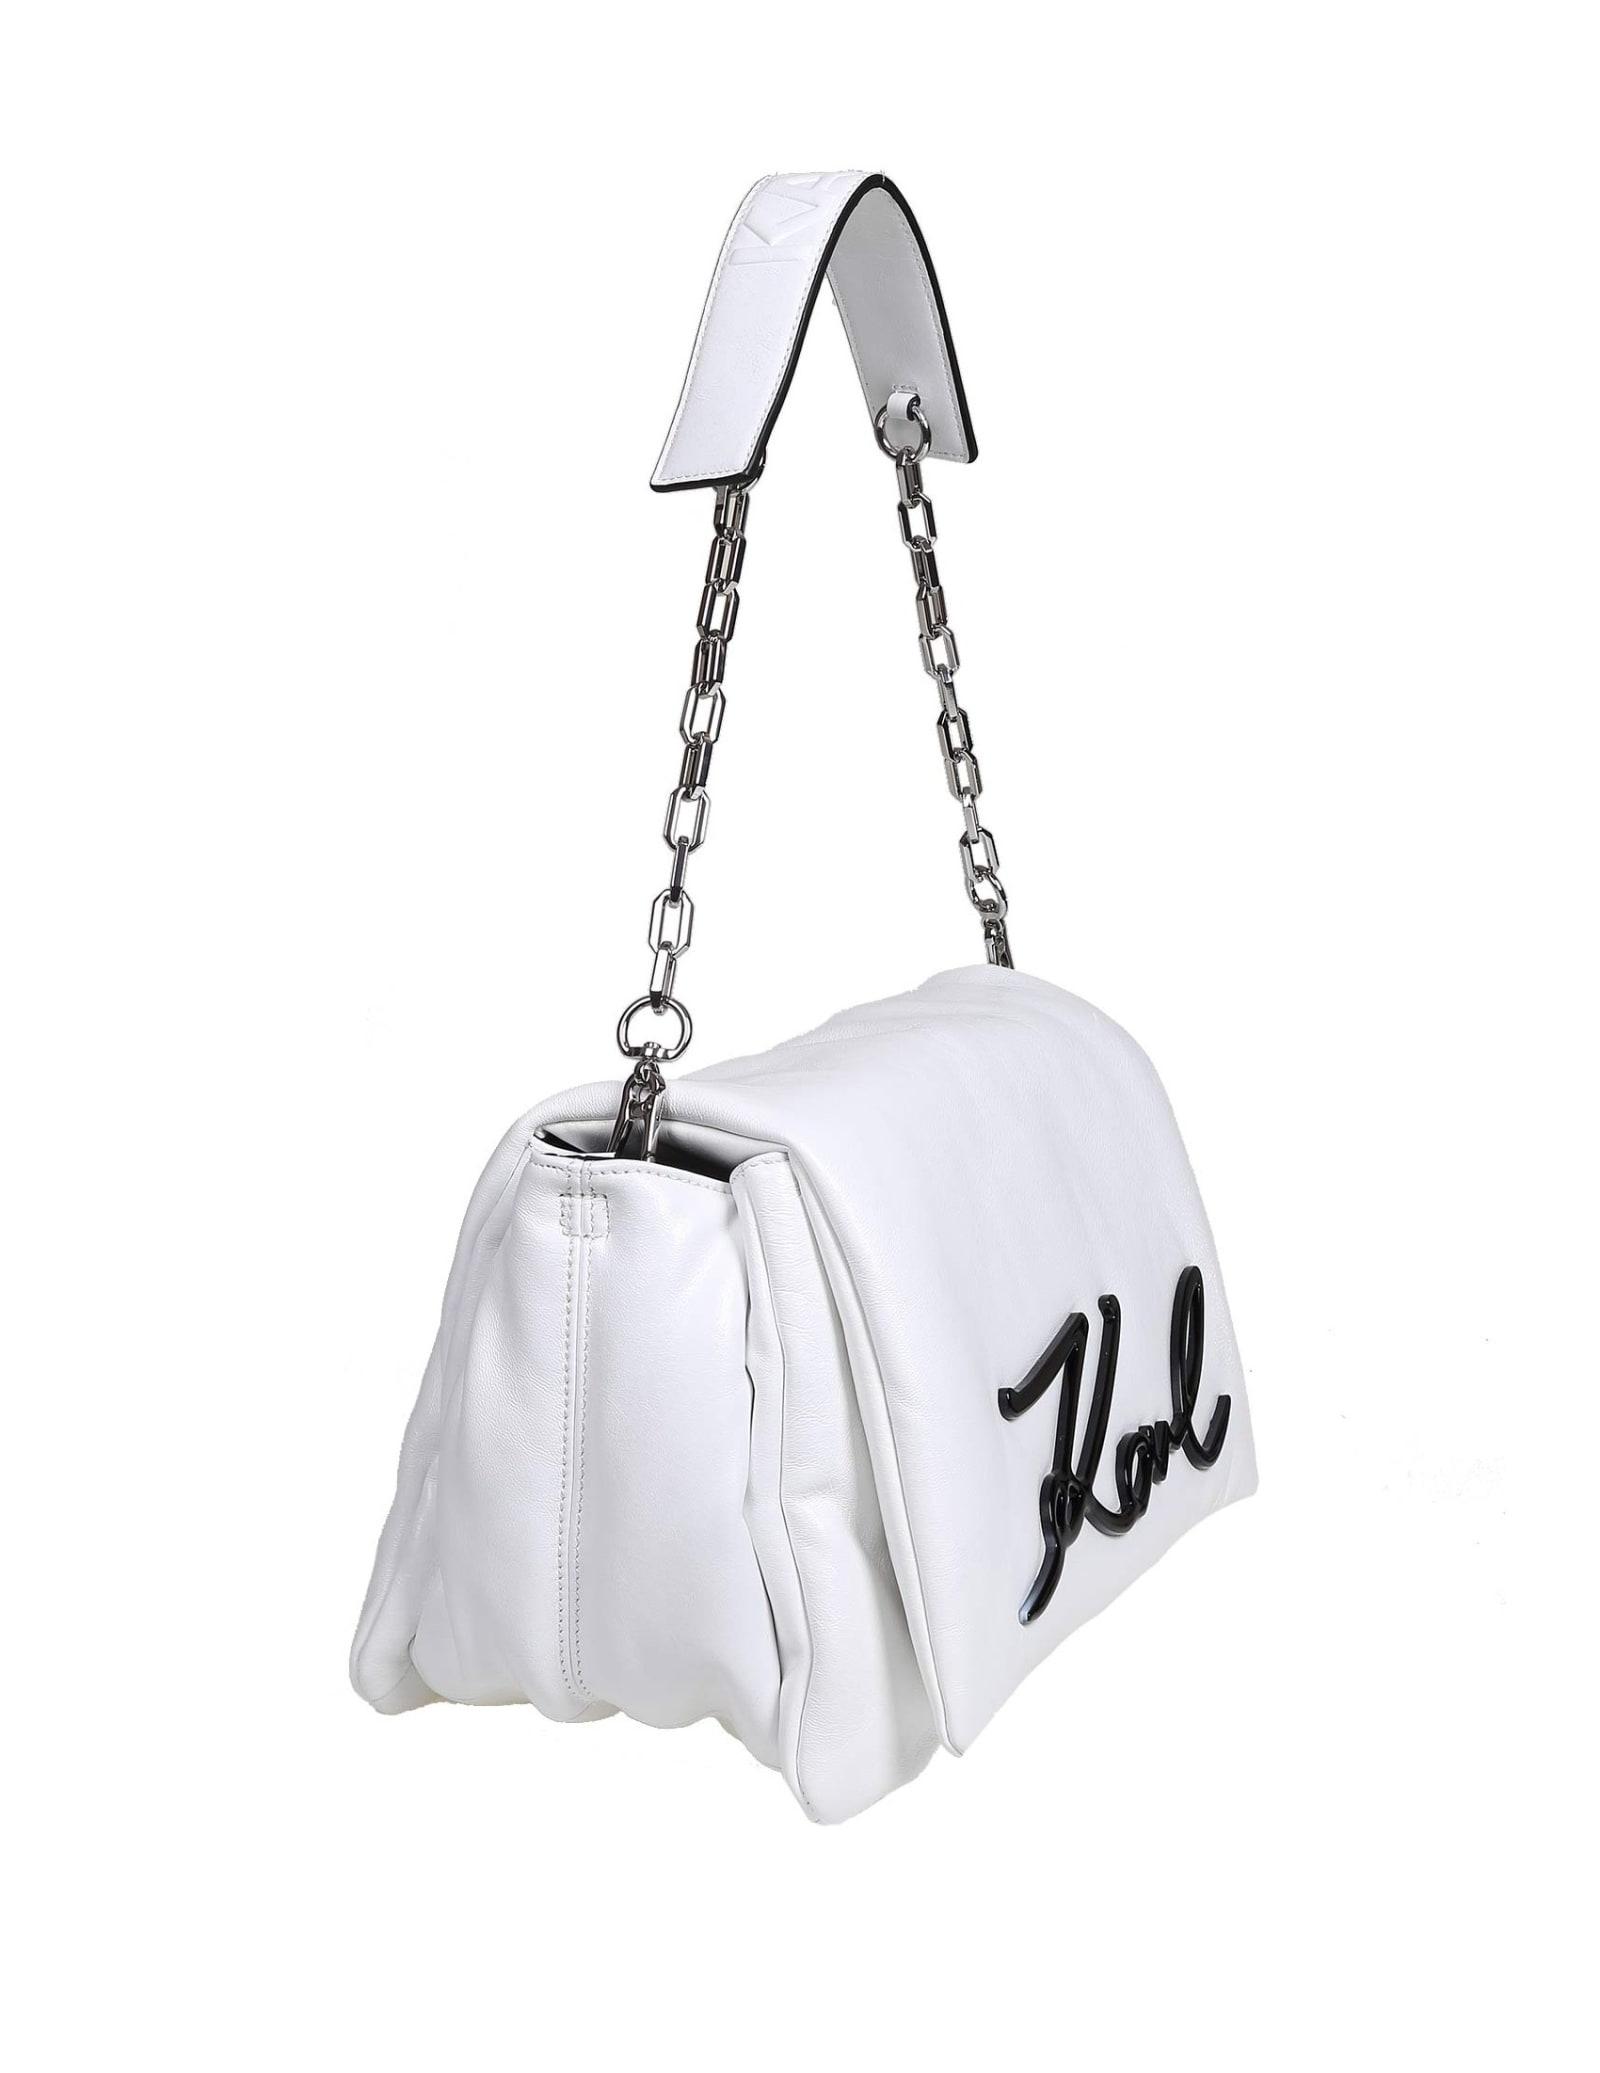 Karl Lagerfeld K / Signature Shoulder Bag In Soft Leather in White